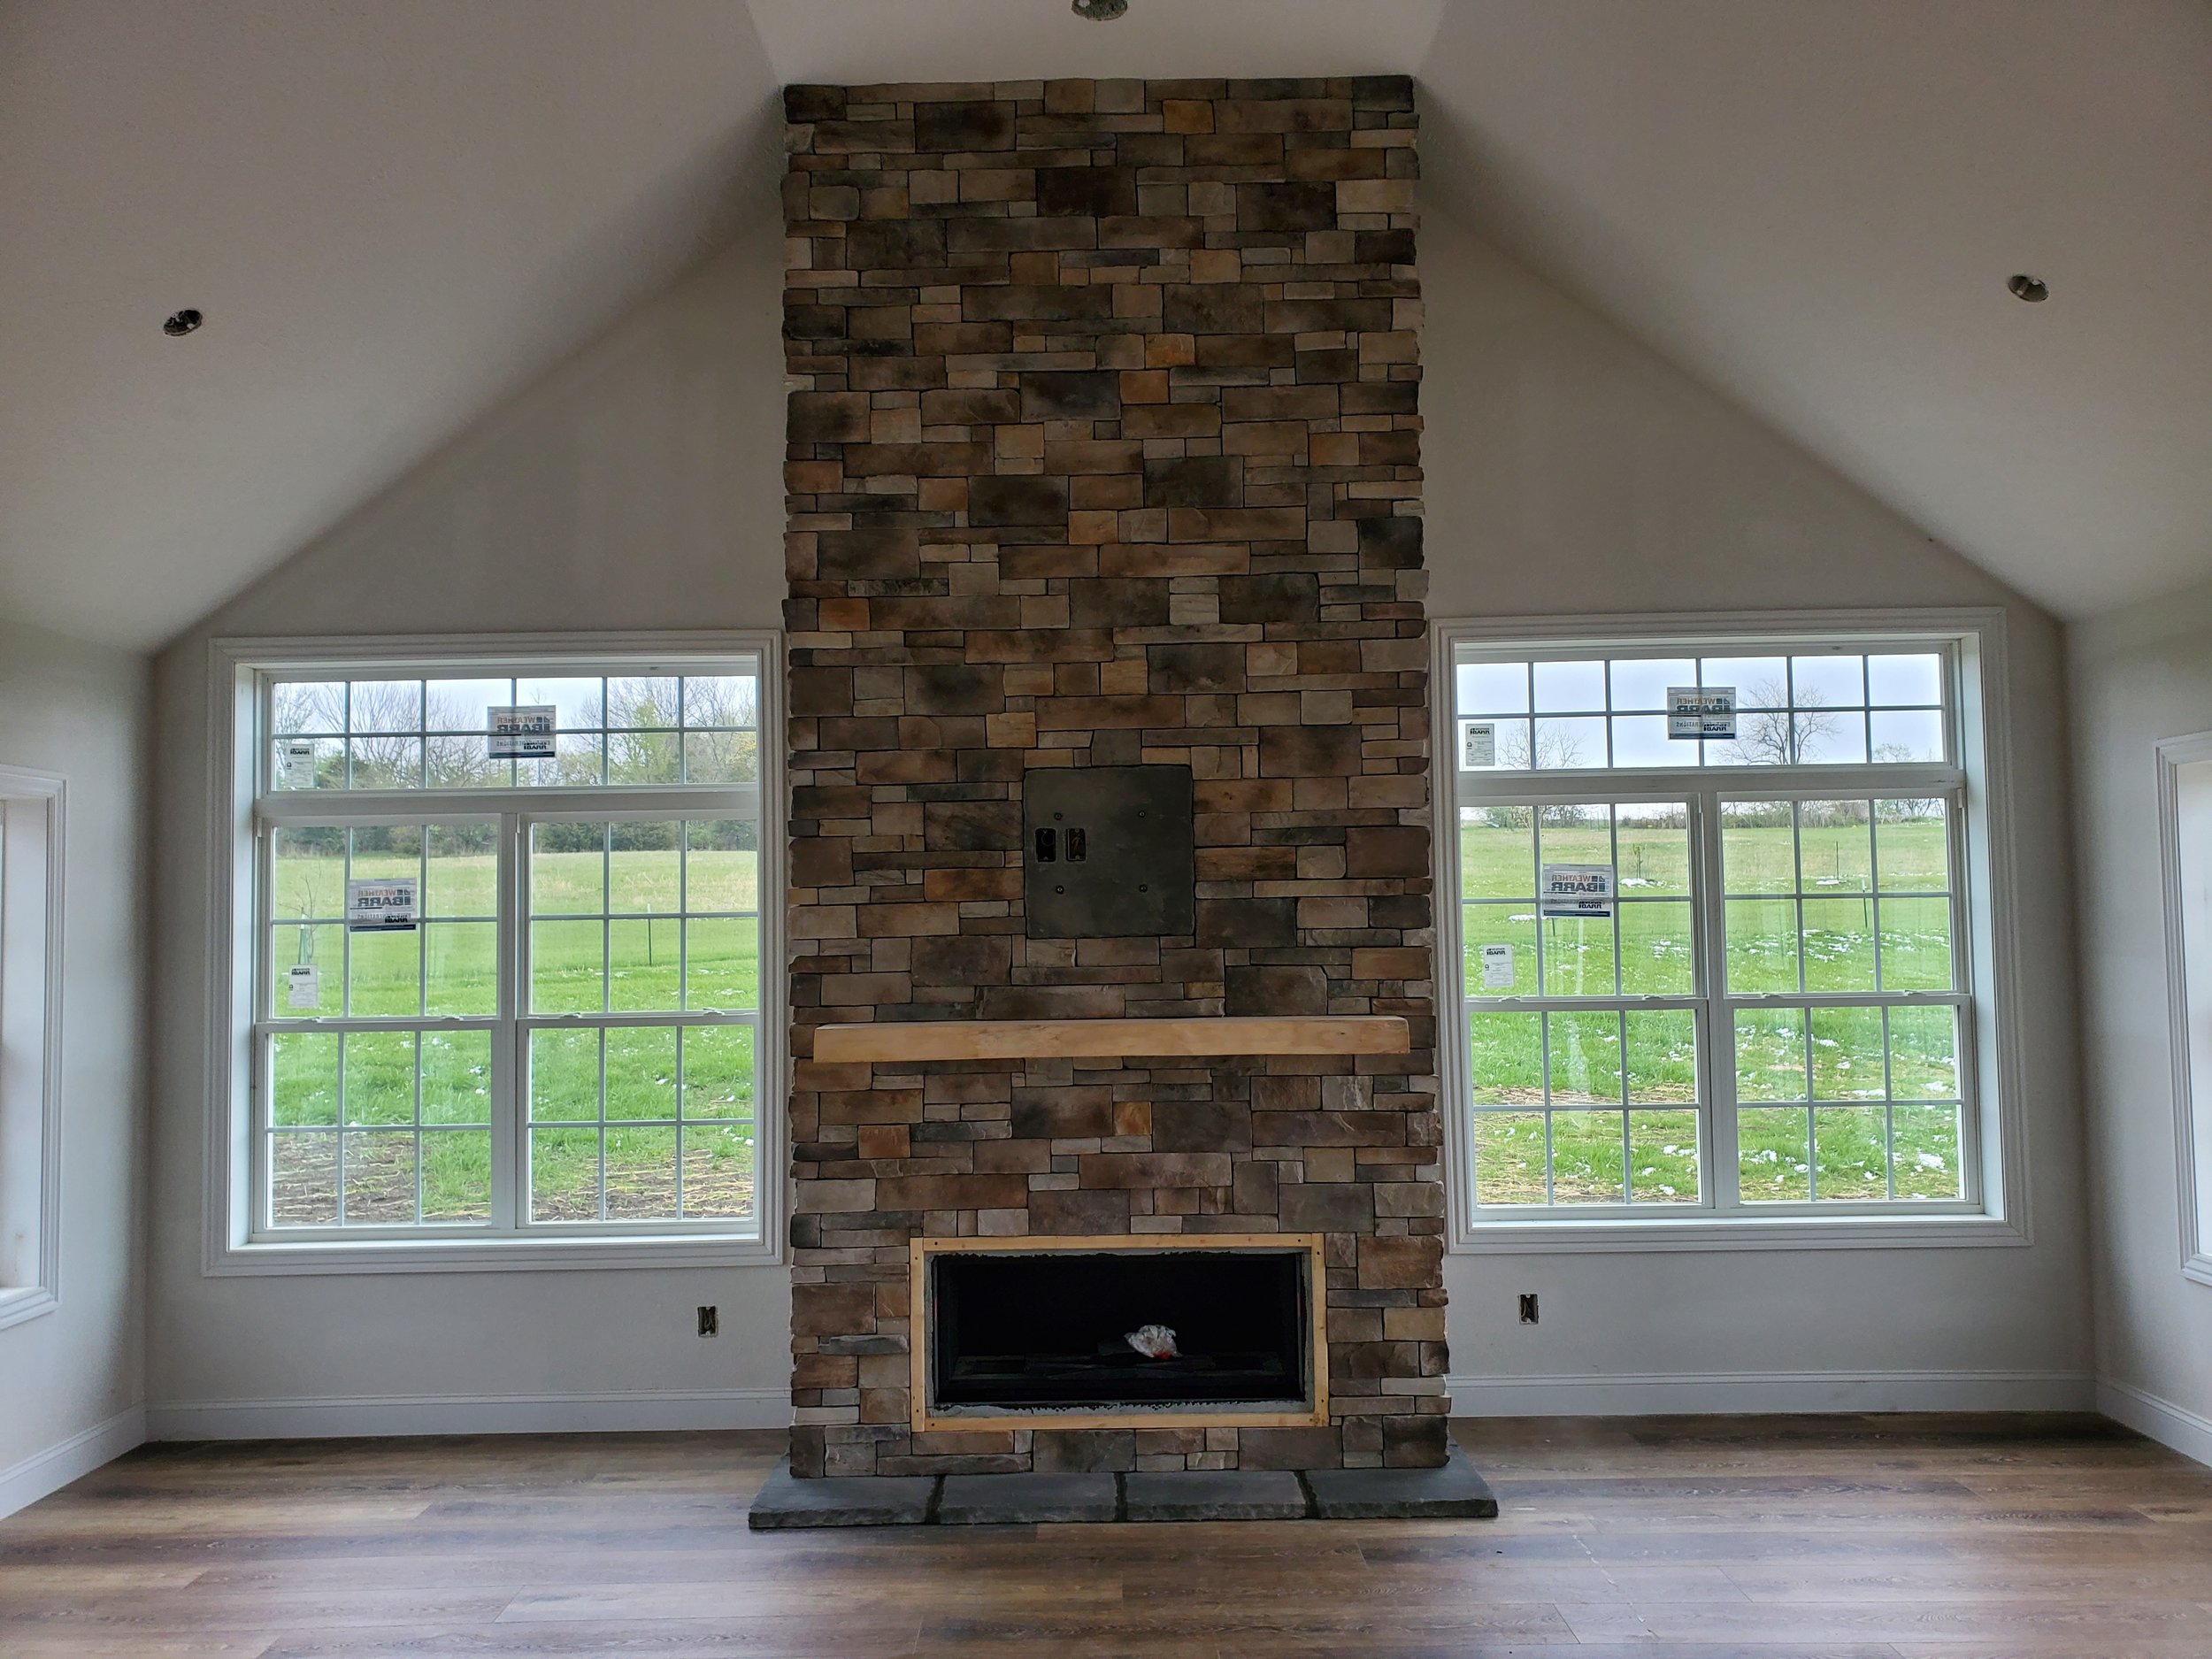 Fireplace project